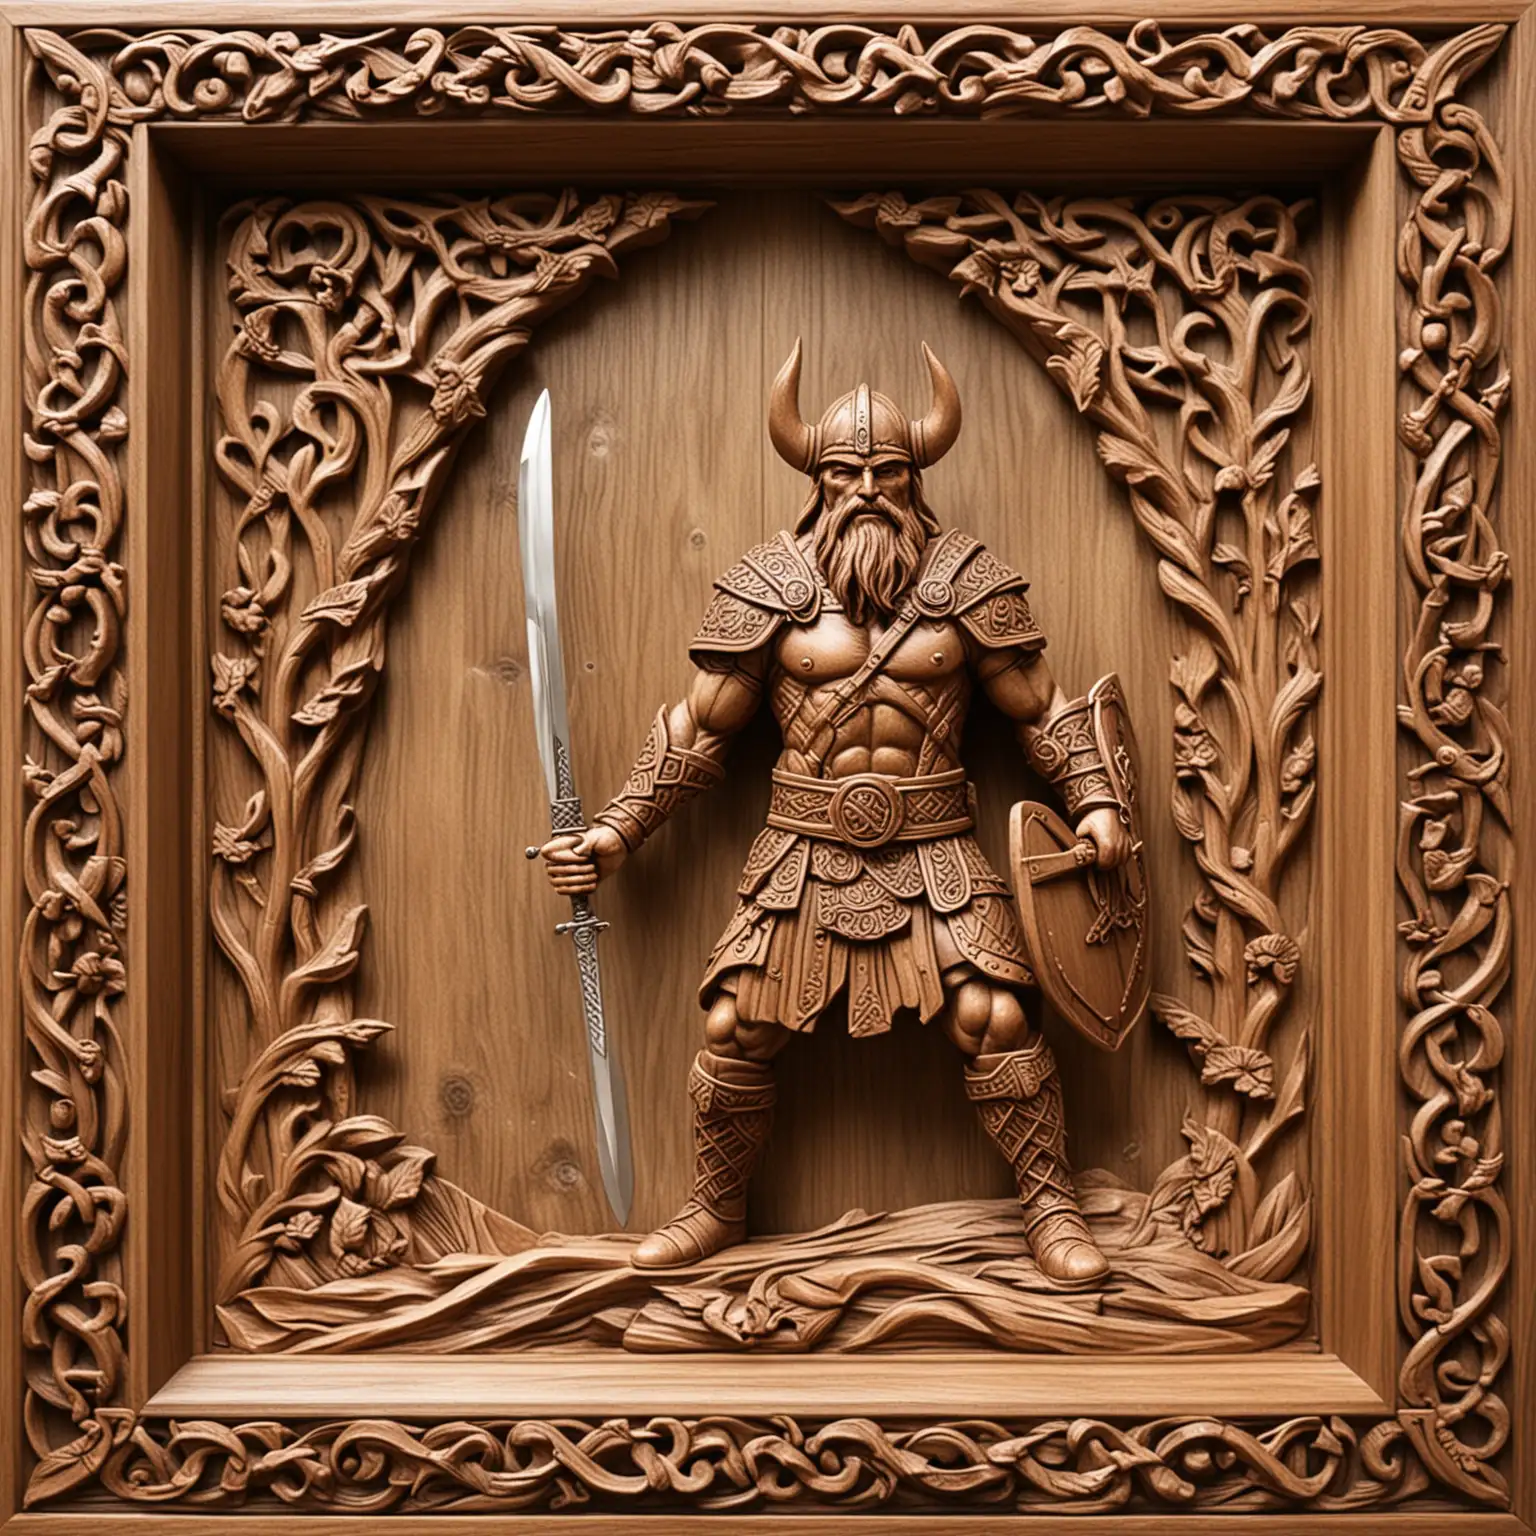 3D Wood Carved Viking Warrior Guarding with Sword in Celtic Surround Frame